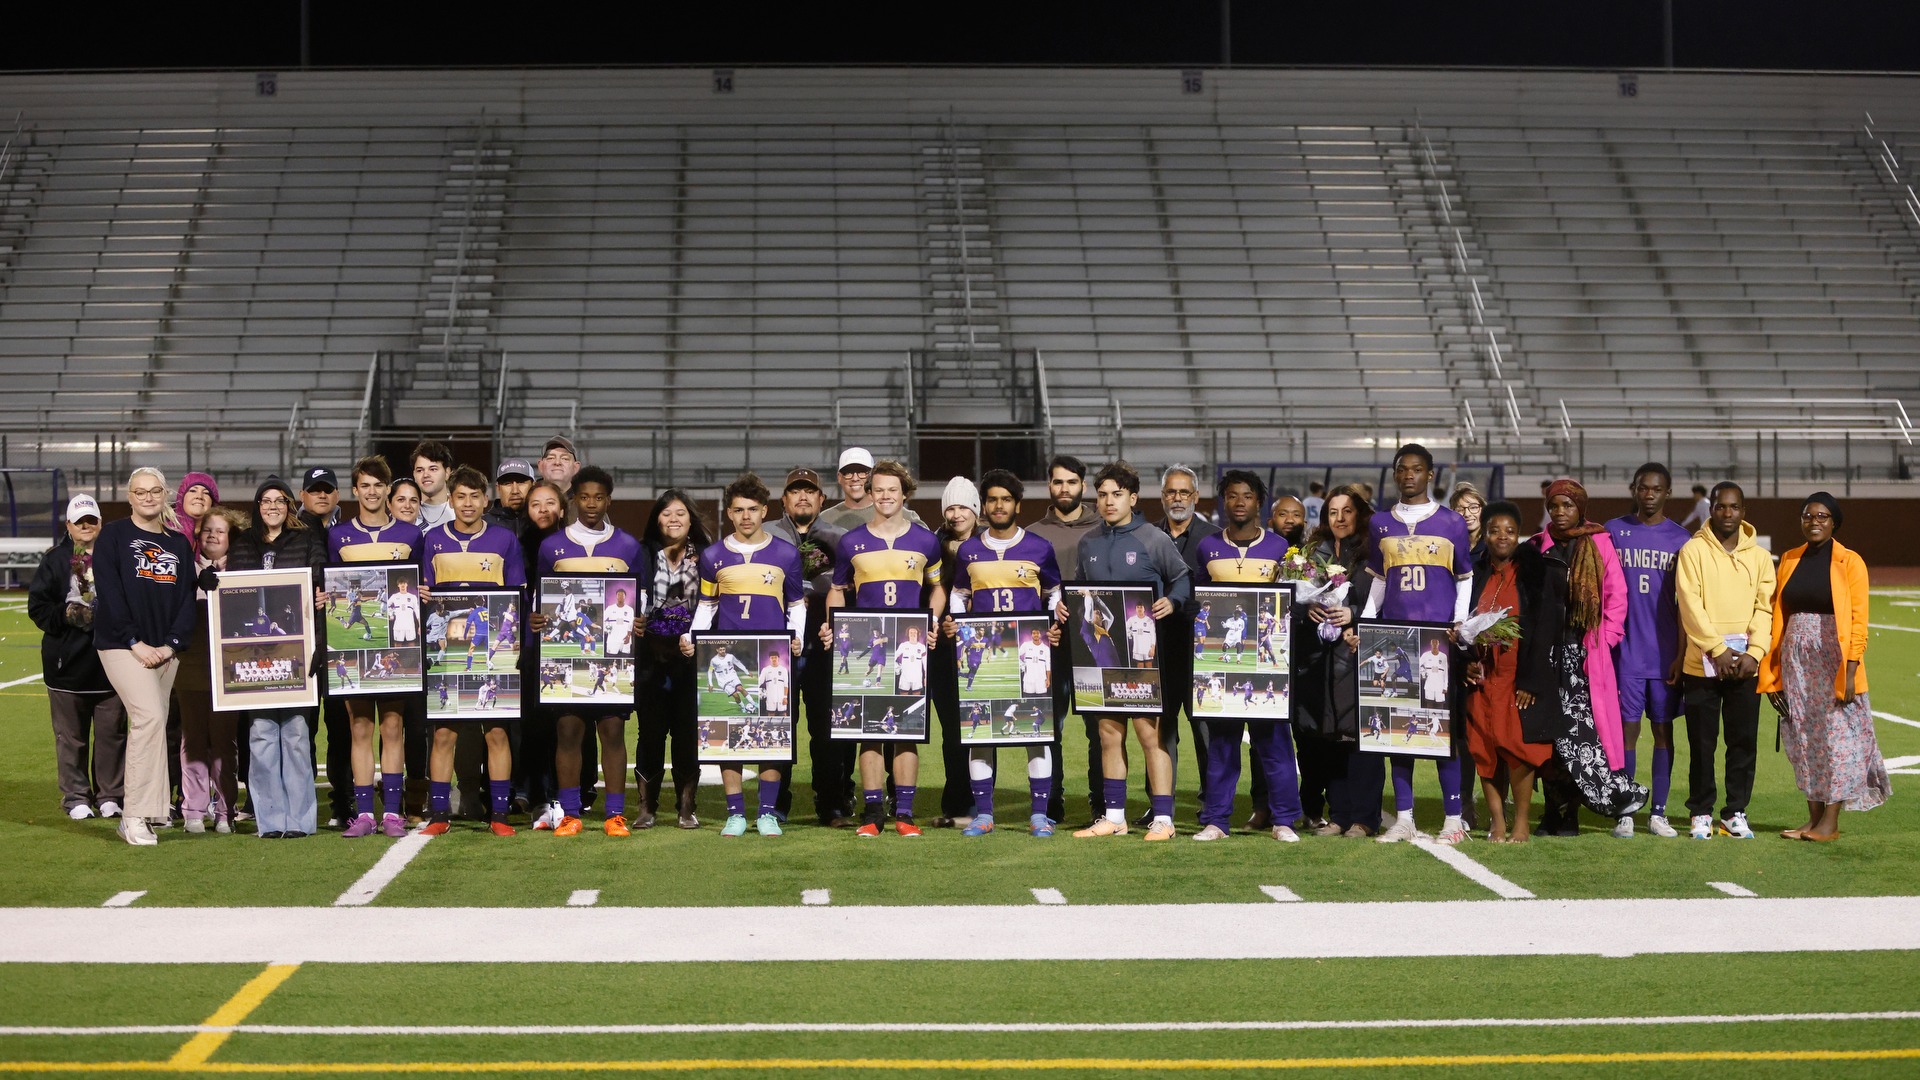 Chisholm Trail HSSlide 8 - RANGERS CONCLUDE THEIR SEASON WITH A WIN ON SENIOR NIGHT